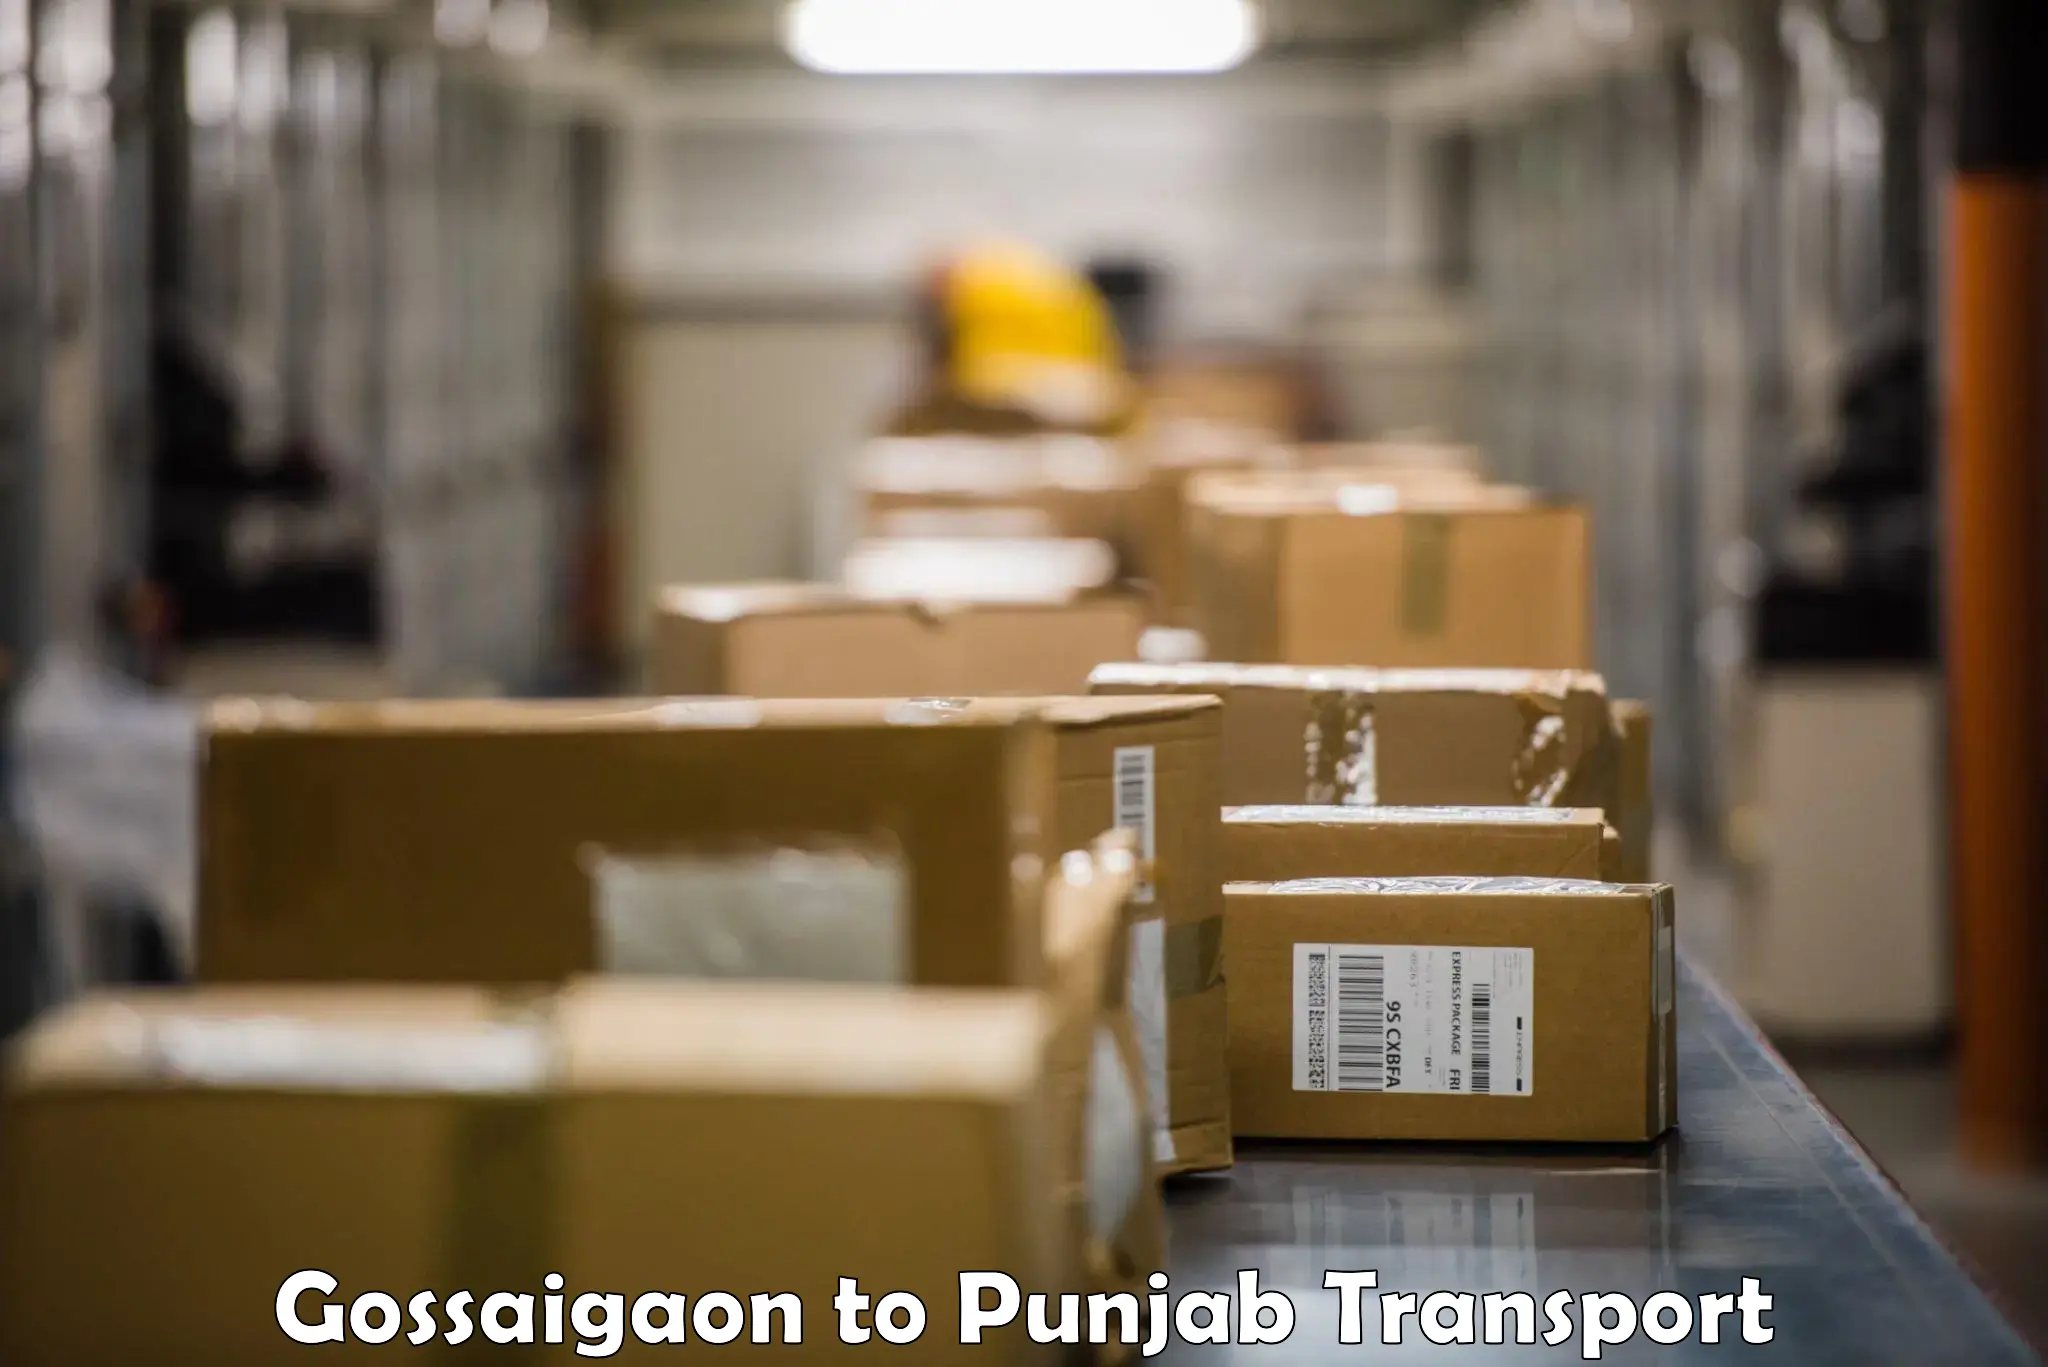 Goods delivery service Gossaigaon to Pathankot